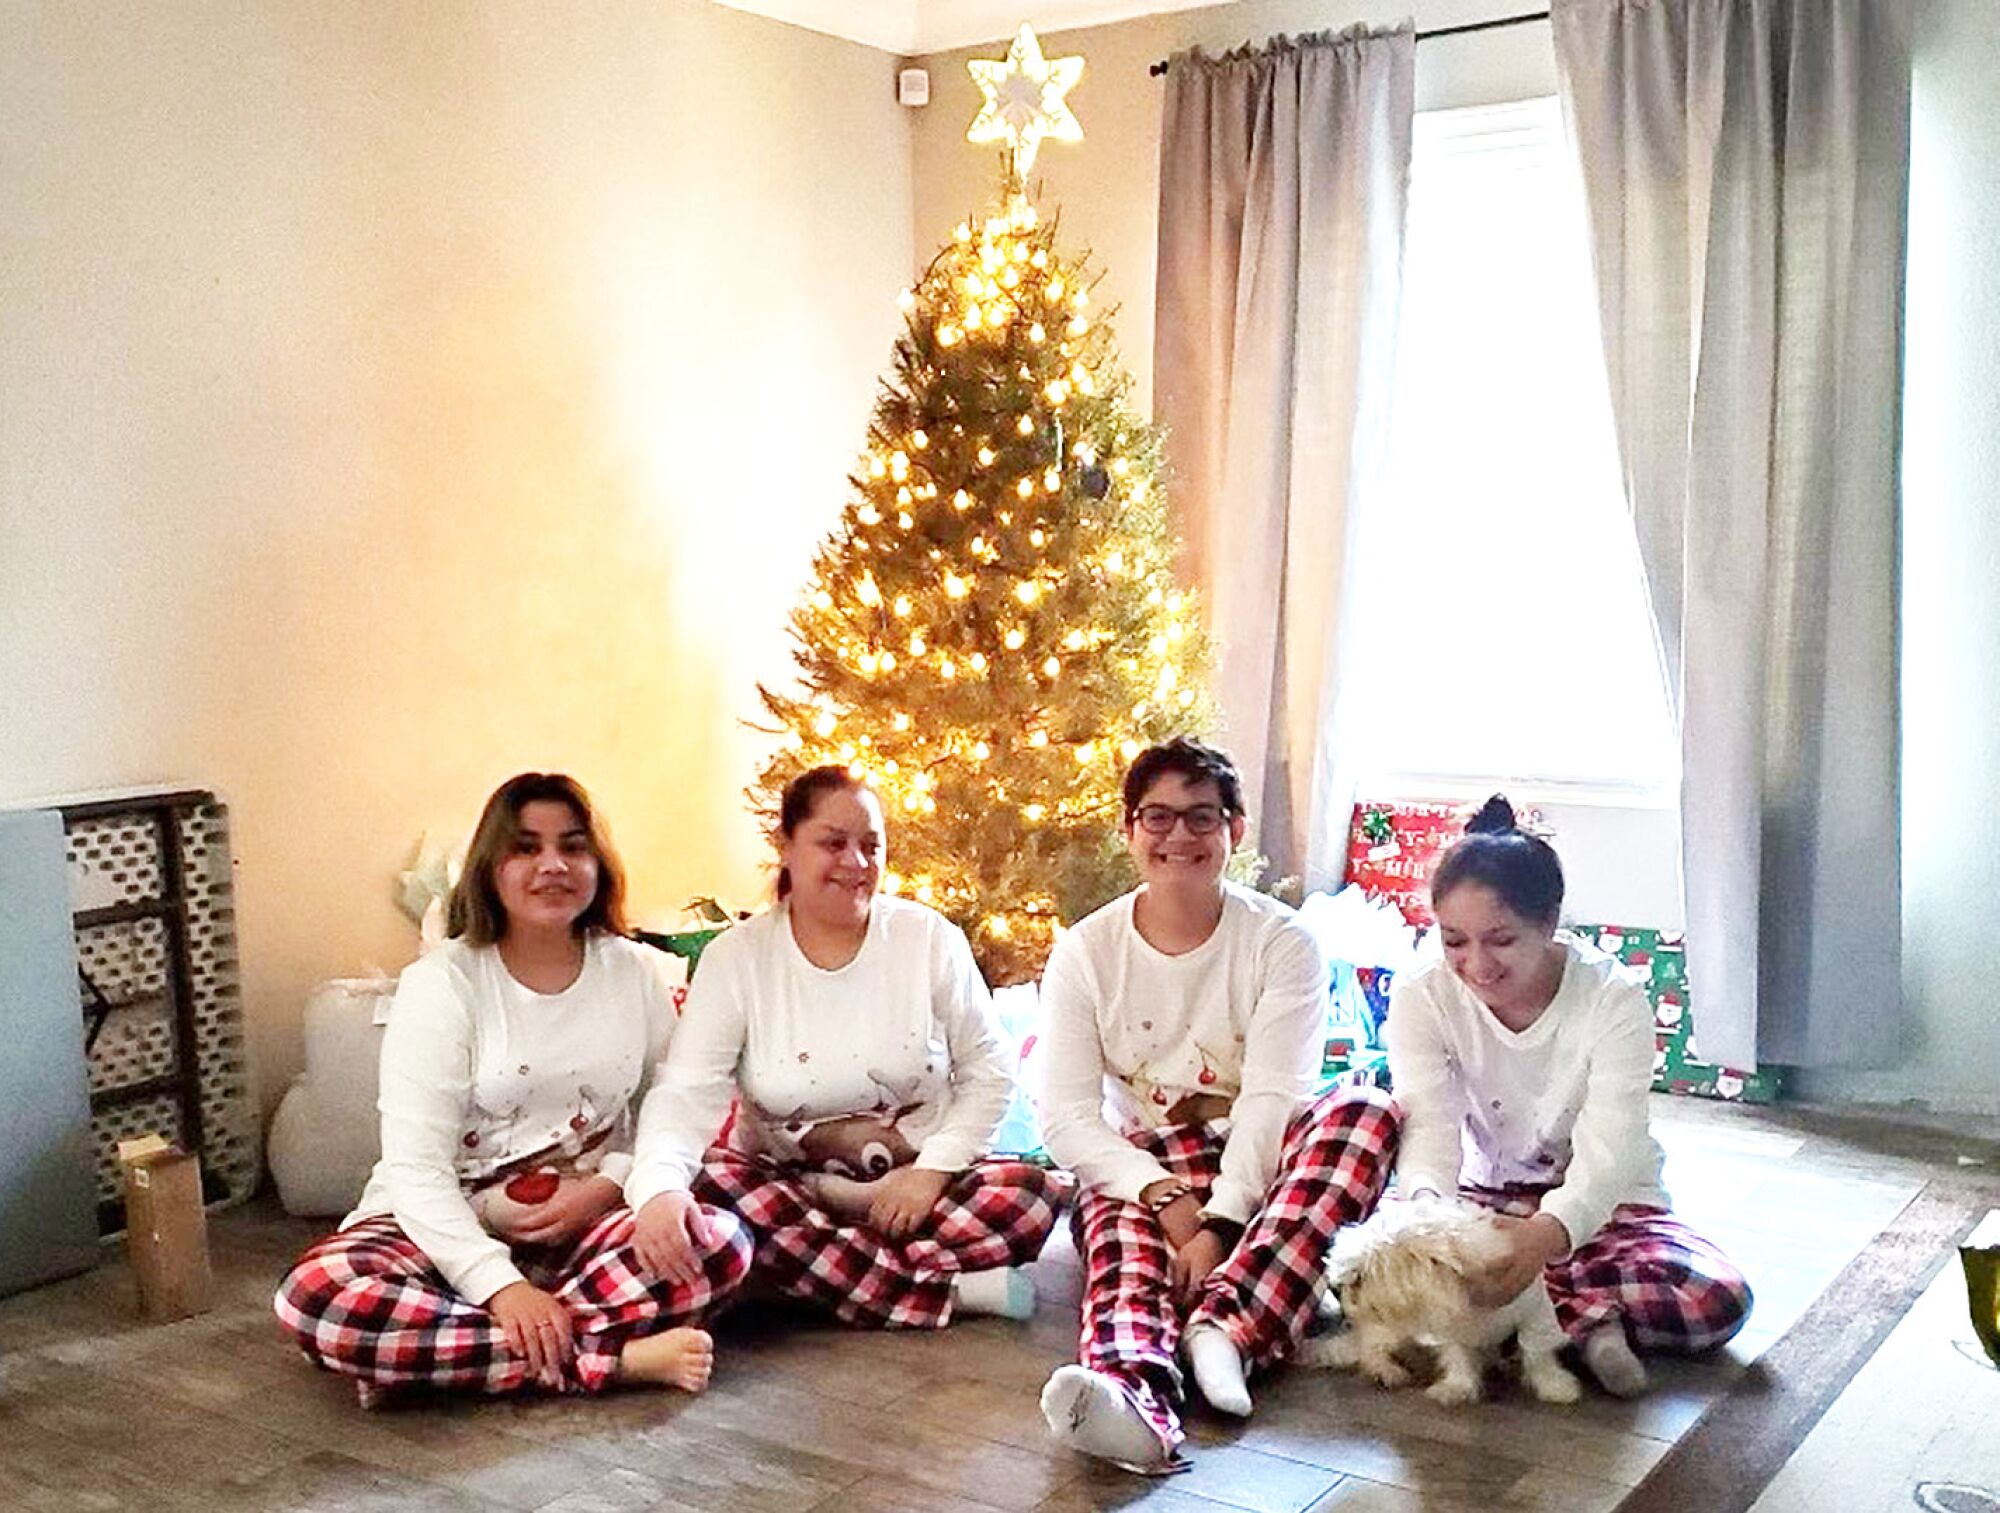 Anthony Reyes Jr., second from right, with his sisters, Marissa, left, Reyna, right, and mother, Stephanie Reyes